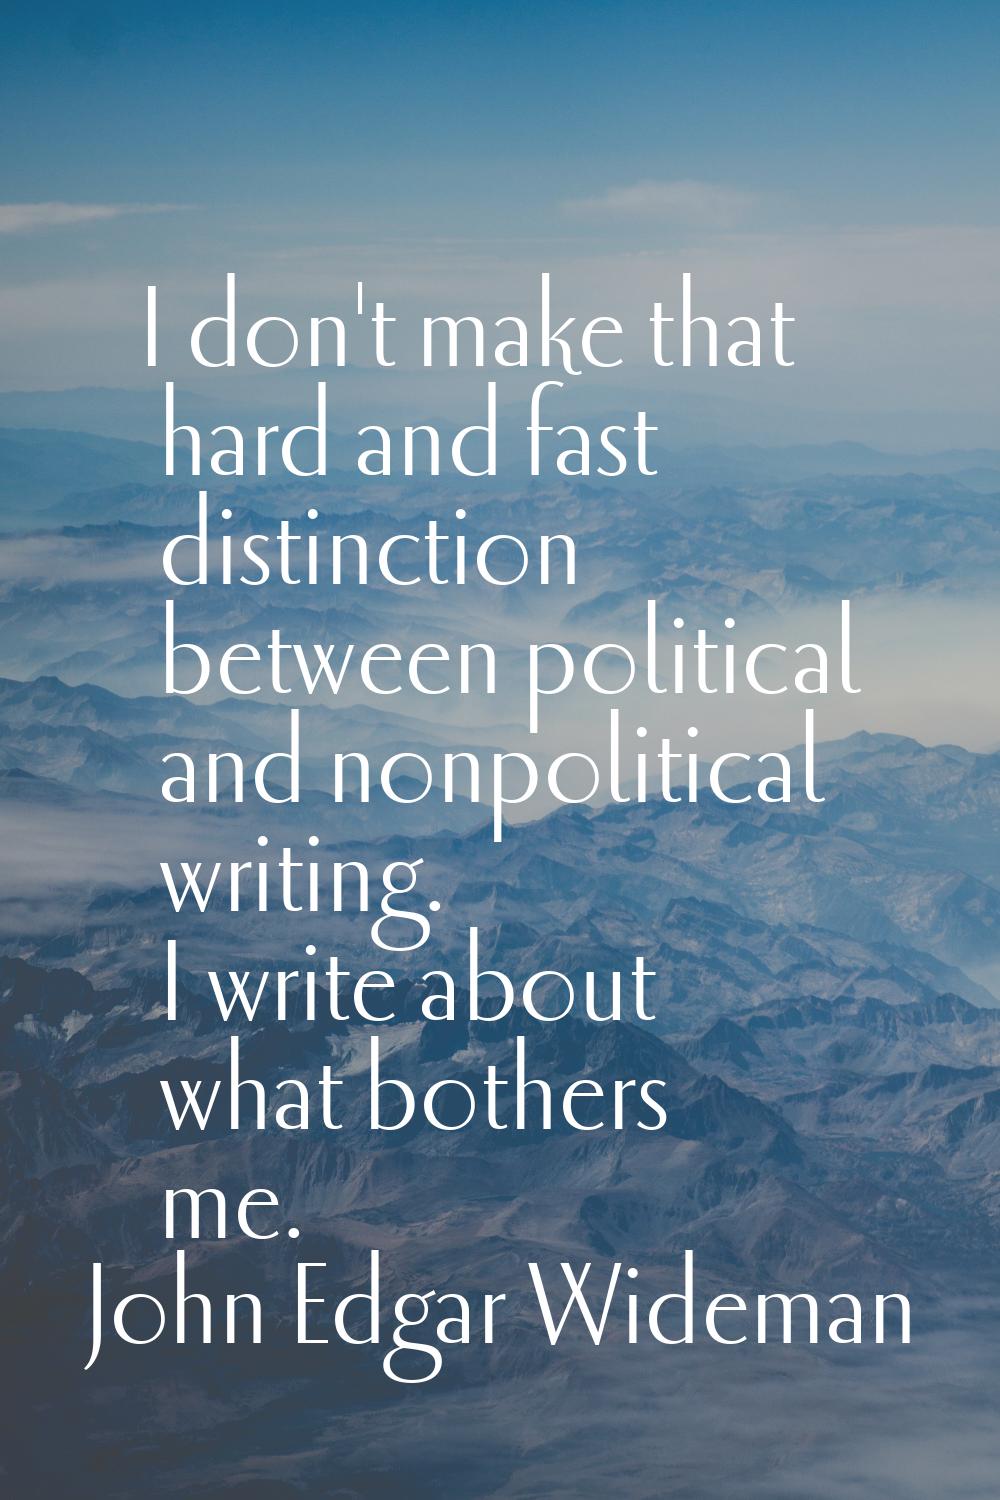 I don't make that hard and fast distinction between political and nonpolitical writing. I write abo